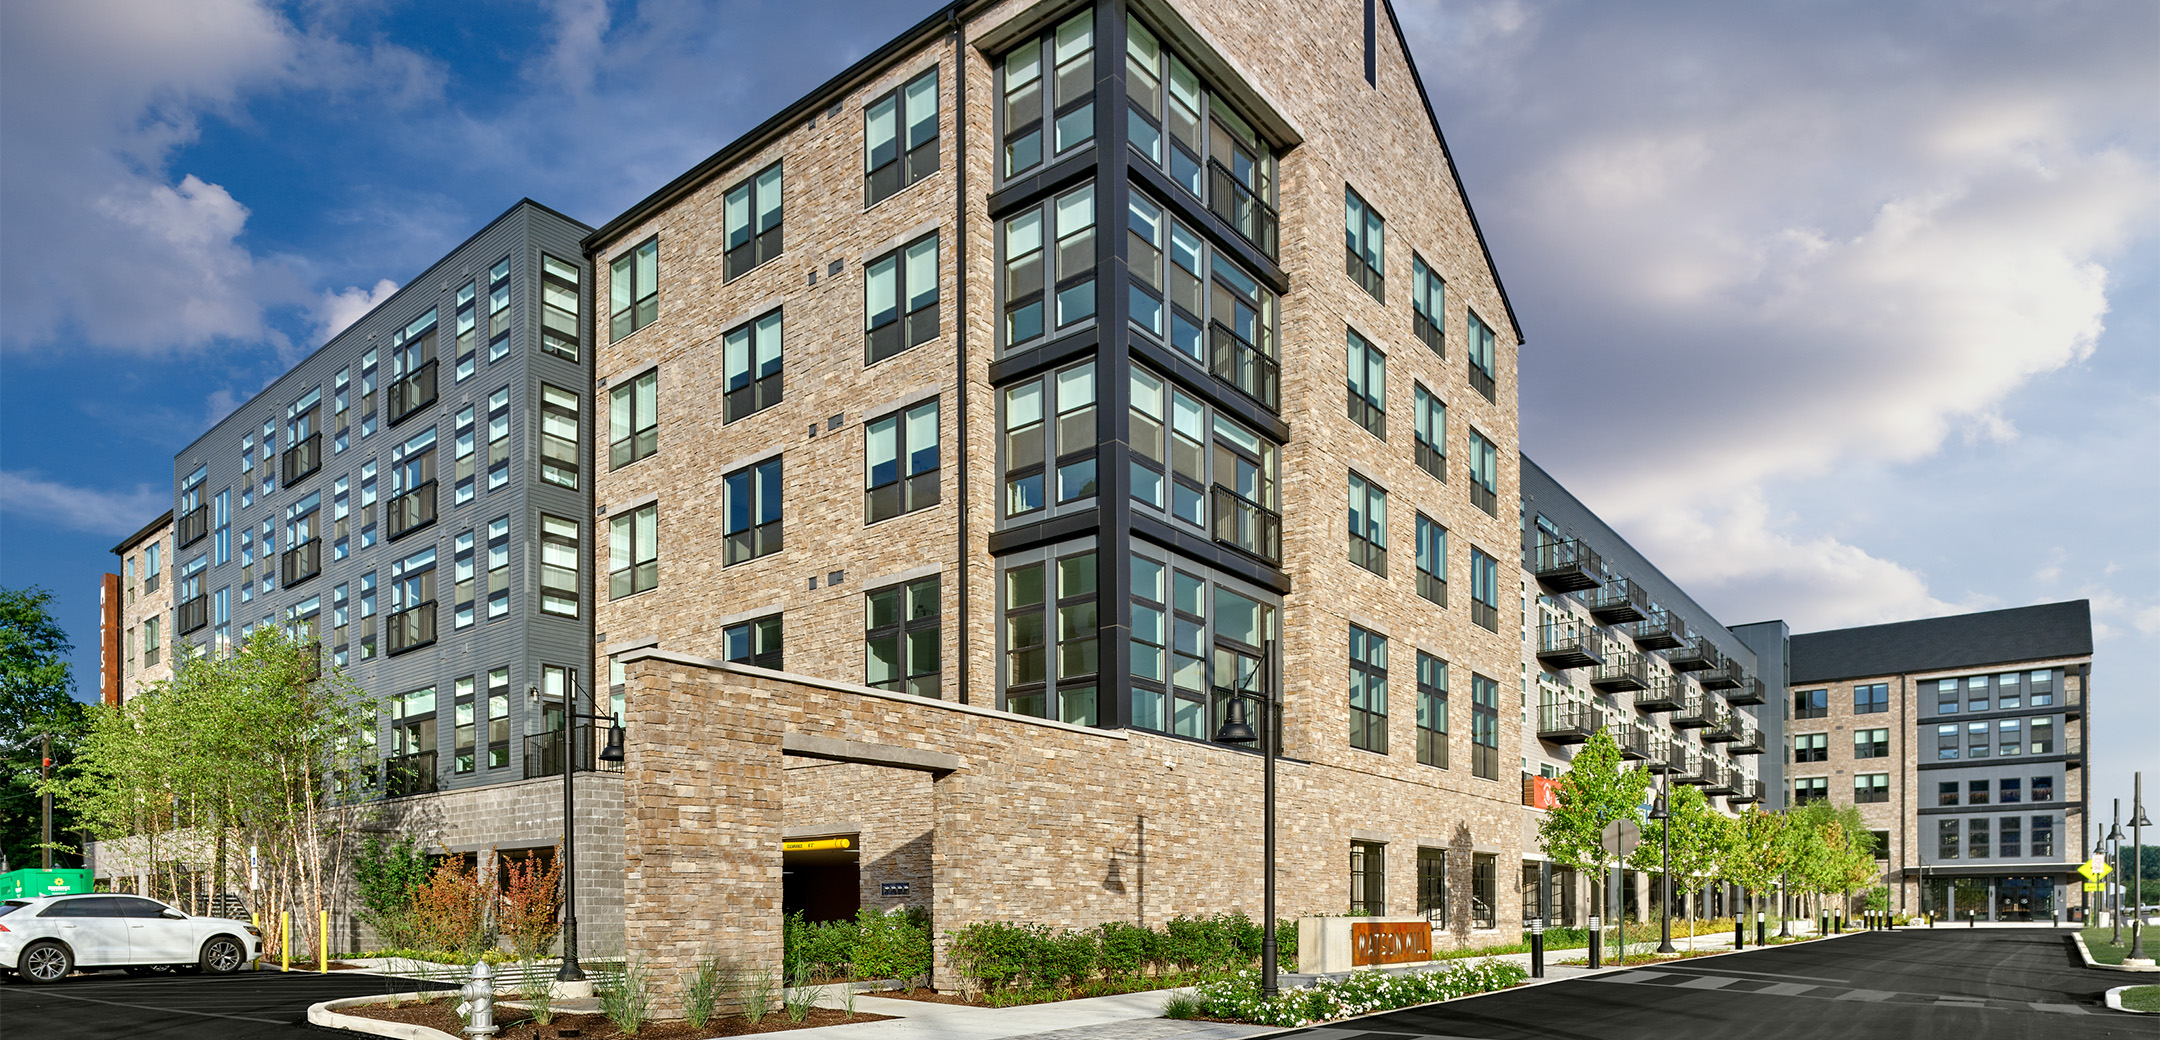 An angled view of Matson Mill Apartment building featuring the tan brick exterior with the corner of the building wrapped in glass windows.